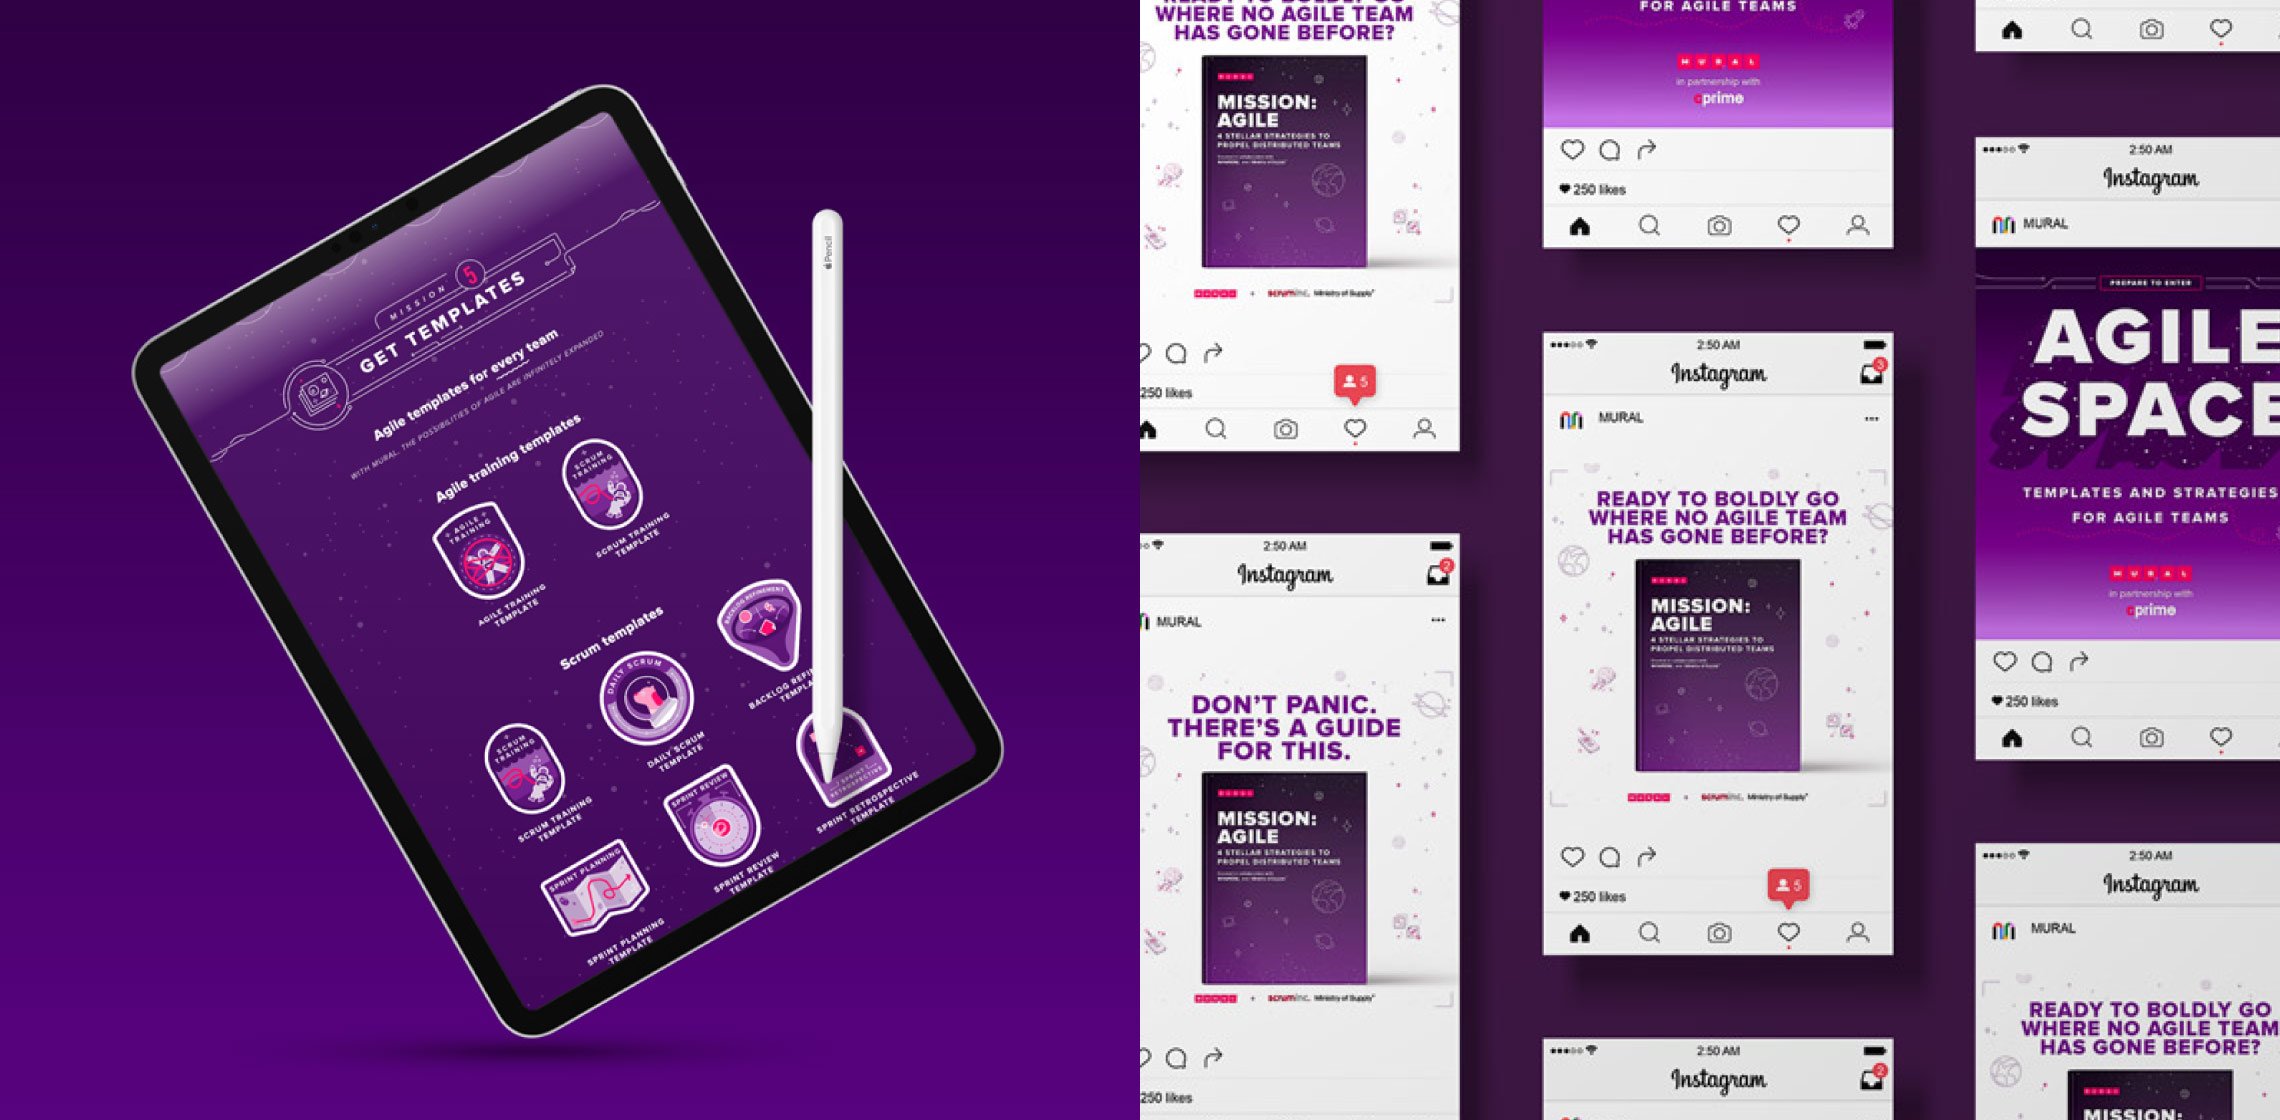 2 images side by side on dark purple backgrounds; at left, screenshot of a collection of 'badges' describing various agile methods in space metaphors; at right, instagram mockups of 3 social media graphics.